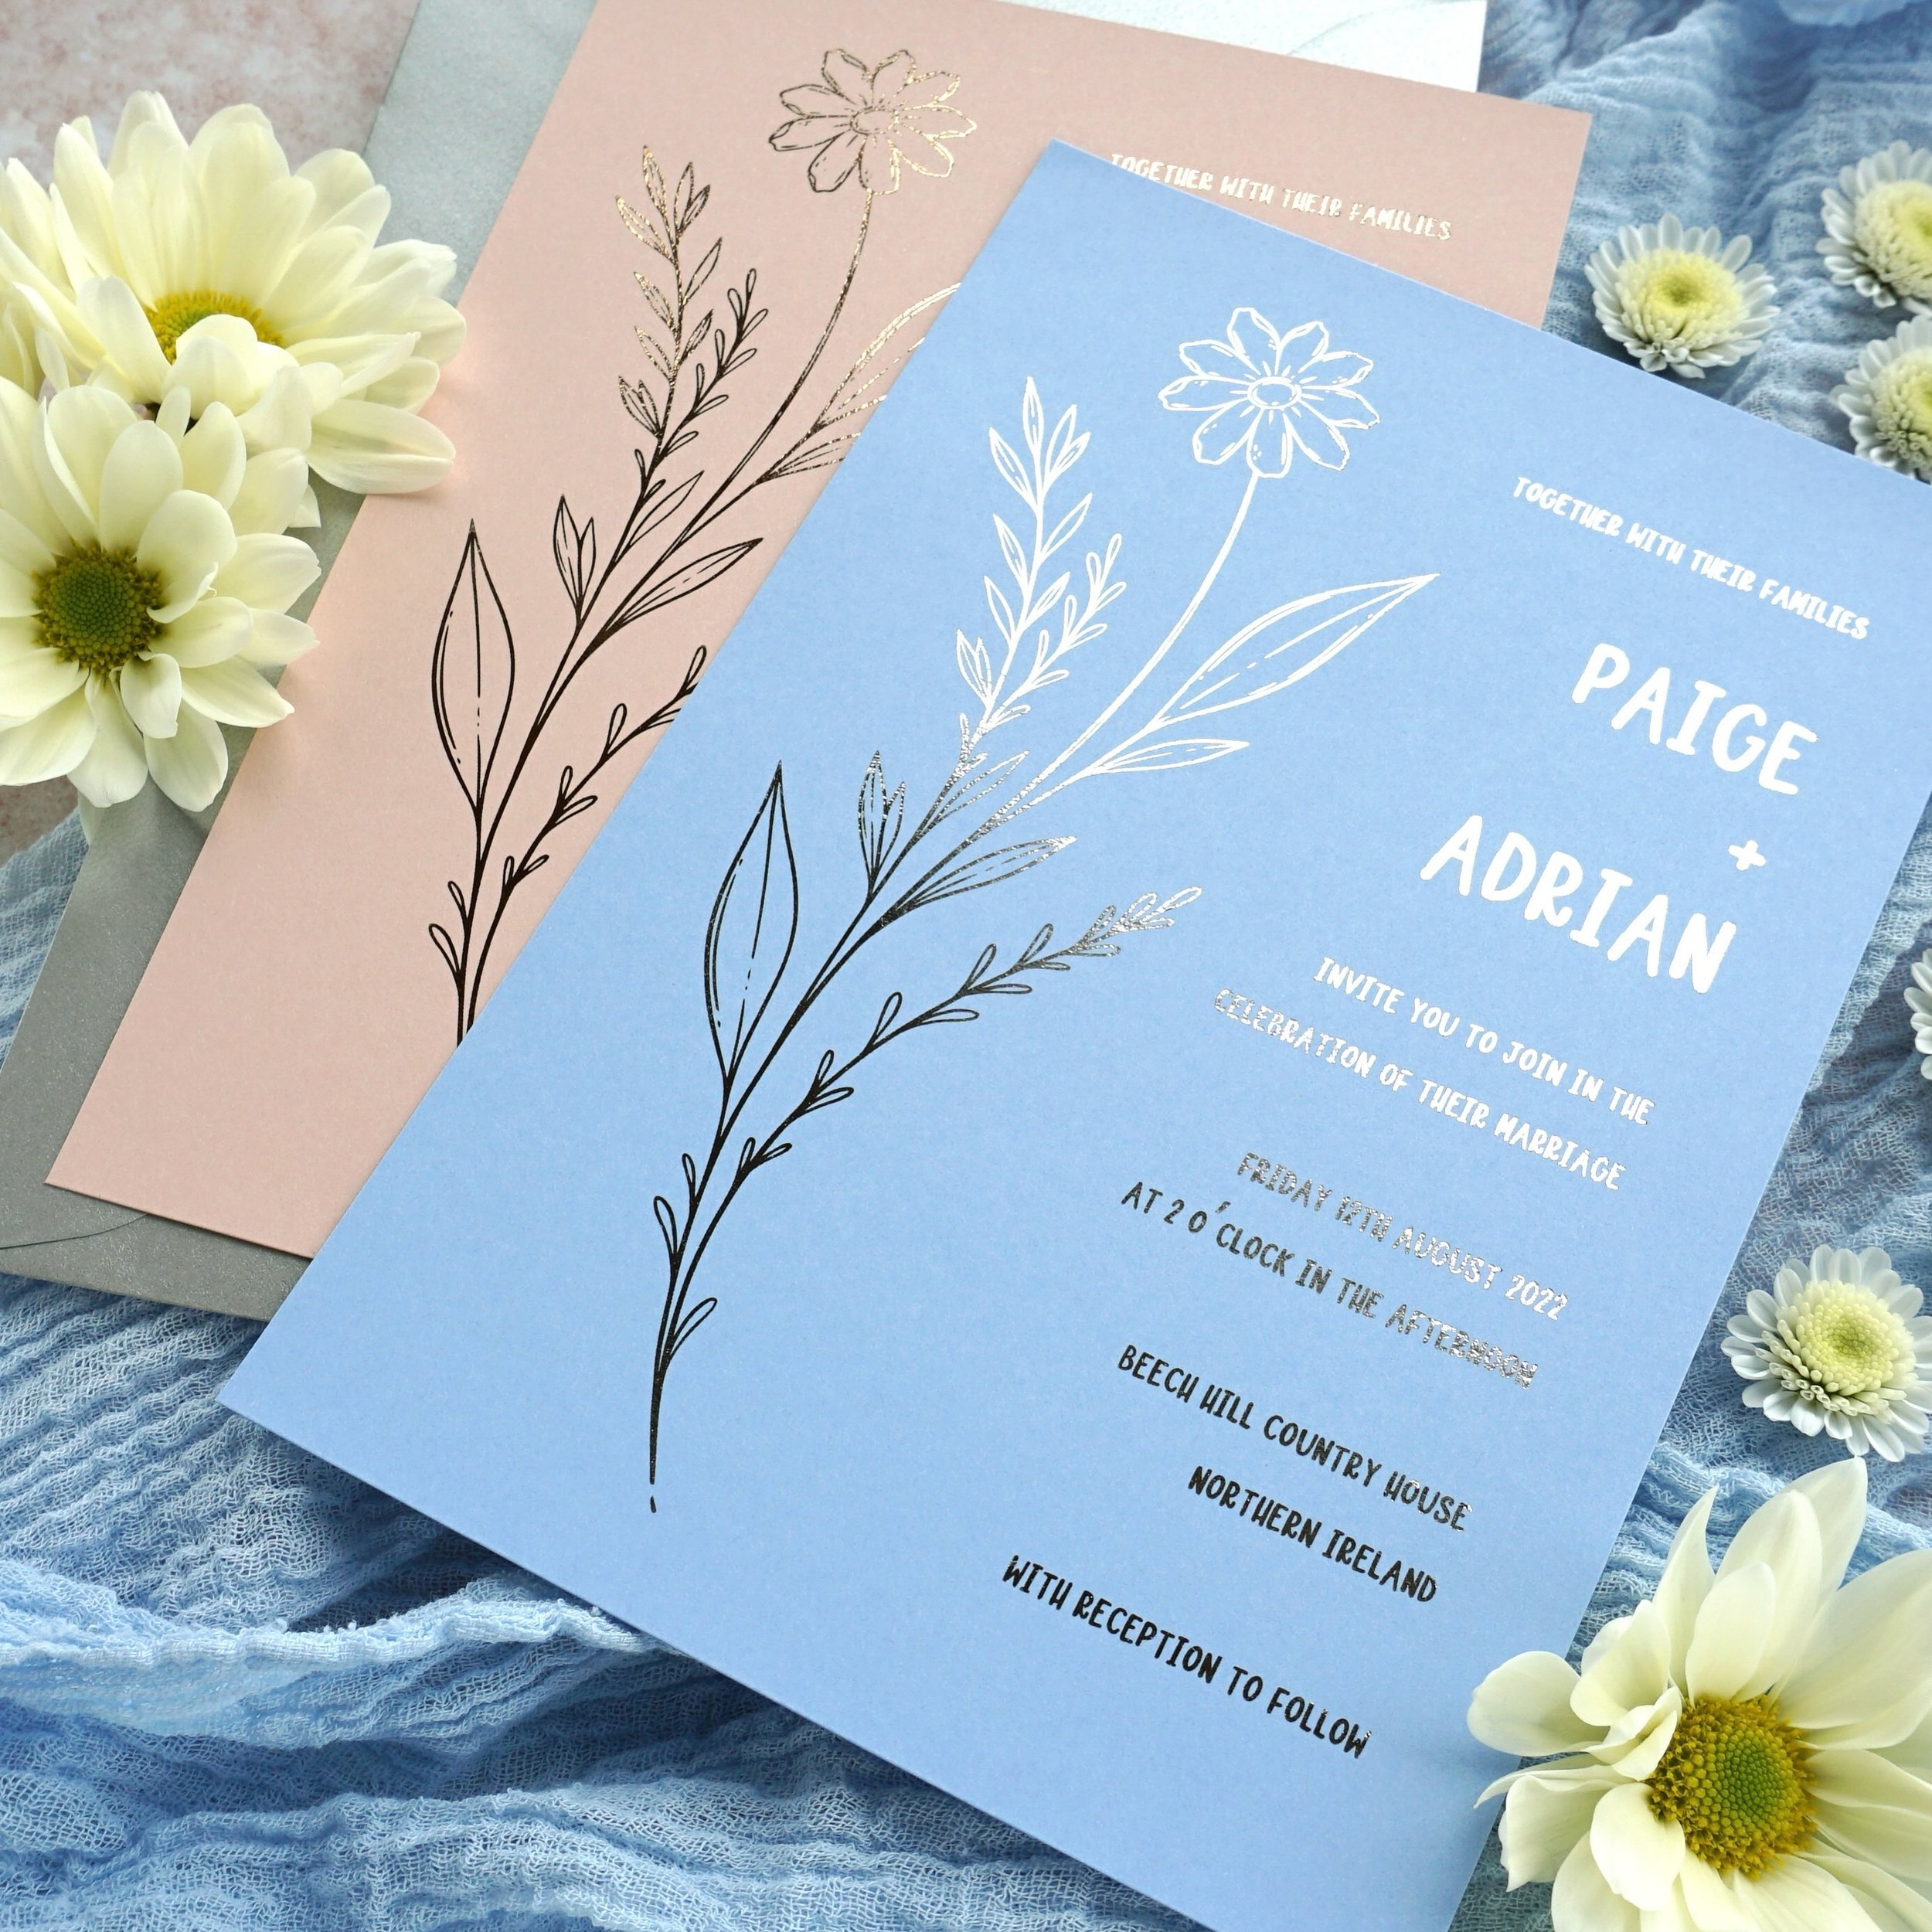 PAIGE - Send shiny things stat&hellip; try saying that quickly! This suite, available in pale blue or rose gold cardstock can be paired with a foil colour of your choice, although the silver is a real winner for us
.
.
.
#weddingstationerysample #sam